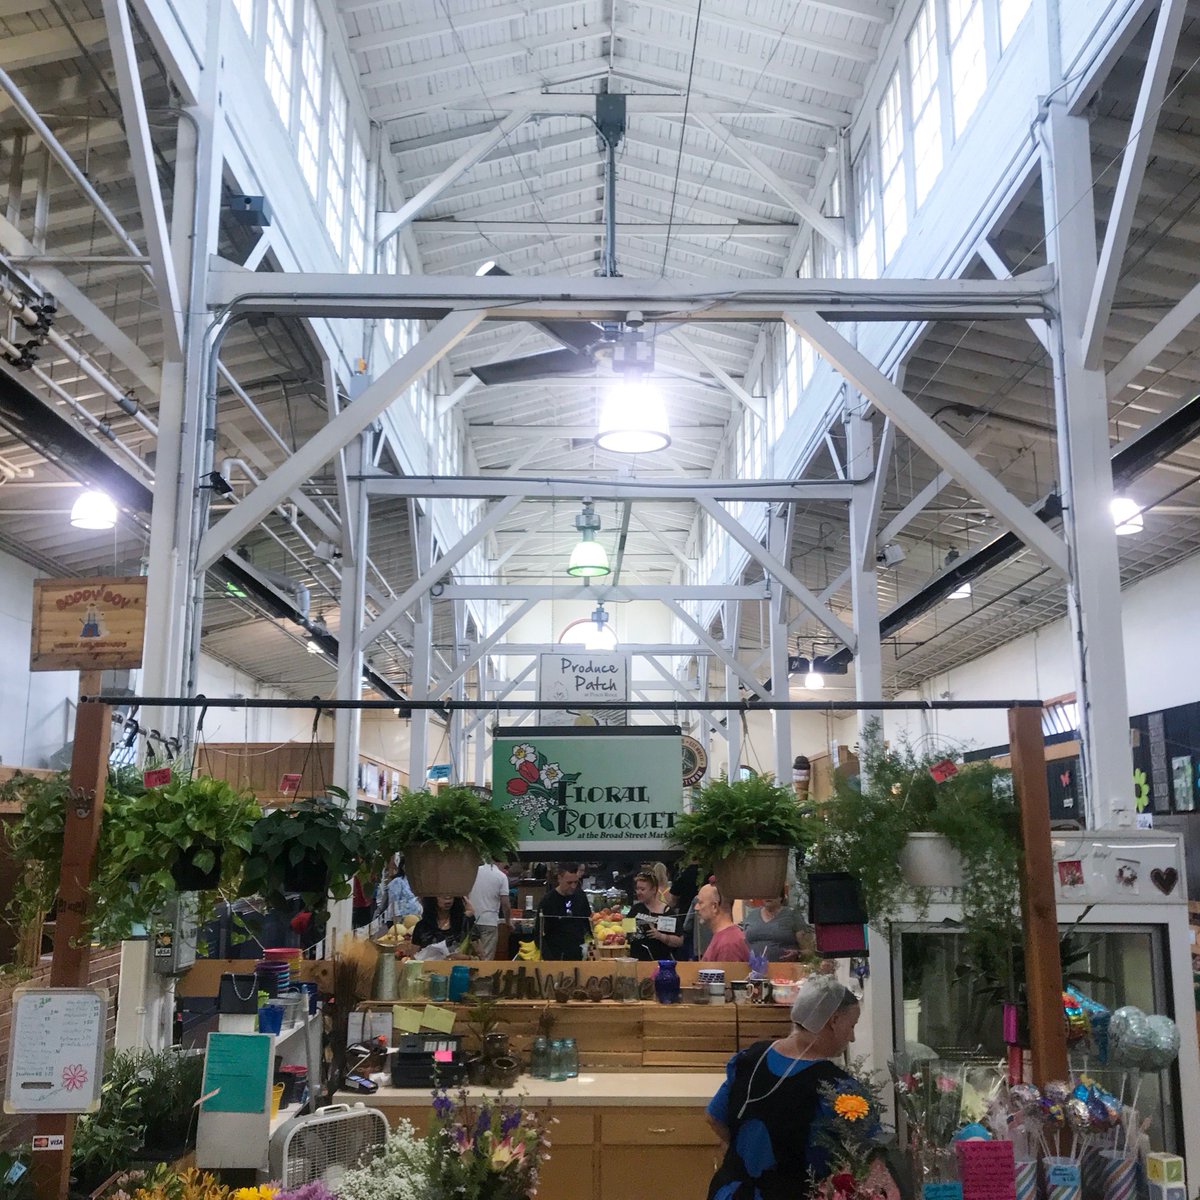 After four days of prepping, our vendors are ready for another full slate of market days! Come join us all weekend to enjoy the fruits of their labor. We have more vendors on the plaza, live music on Saturday from Switch Fu, and, of course, all your favorite market finds.